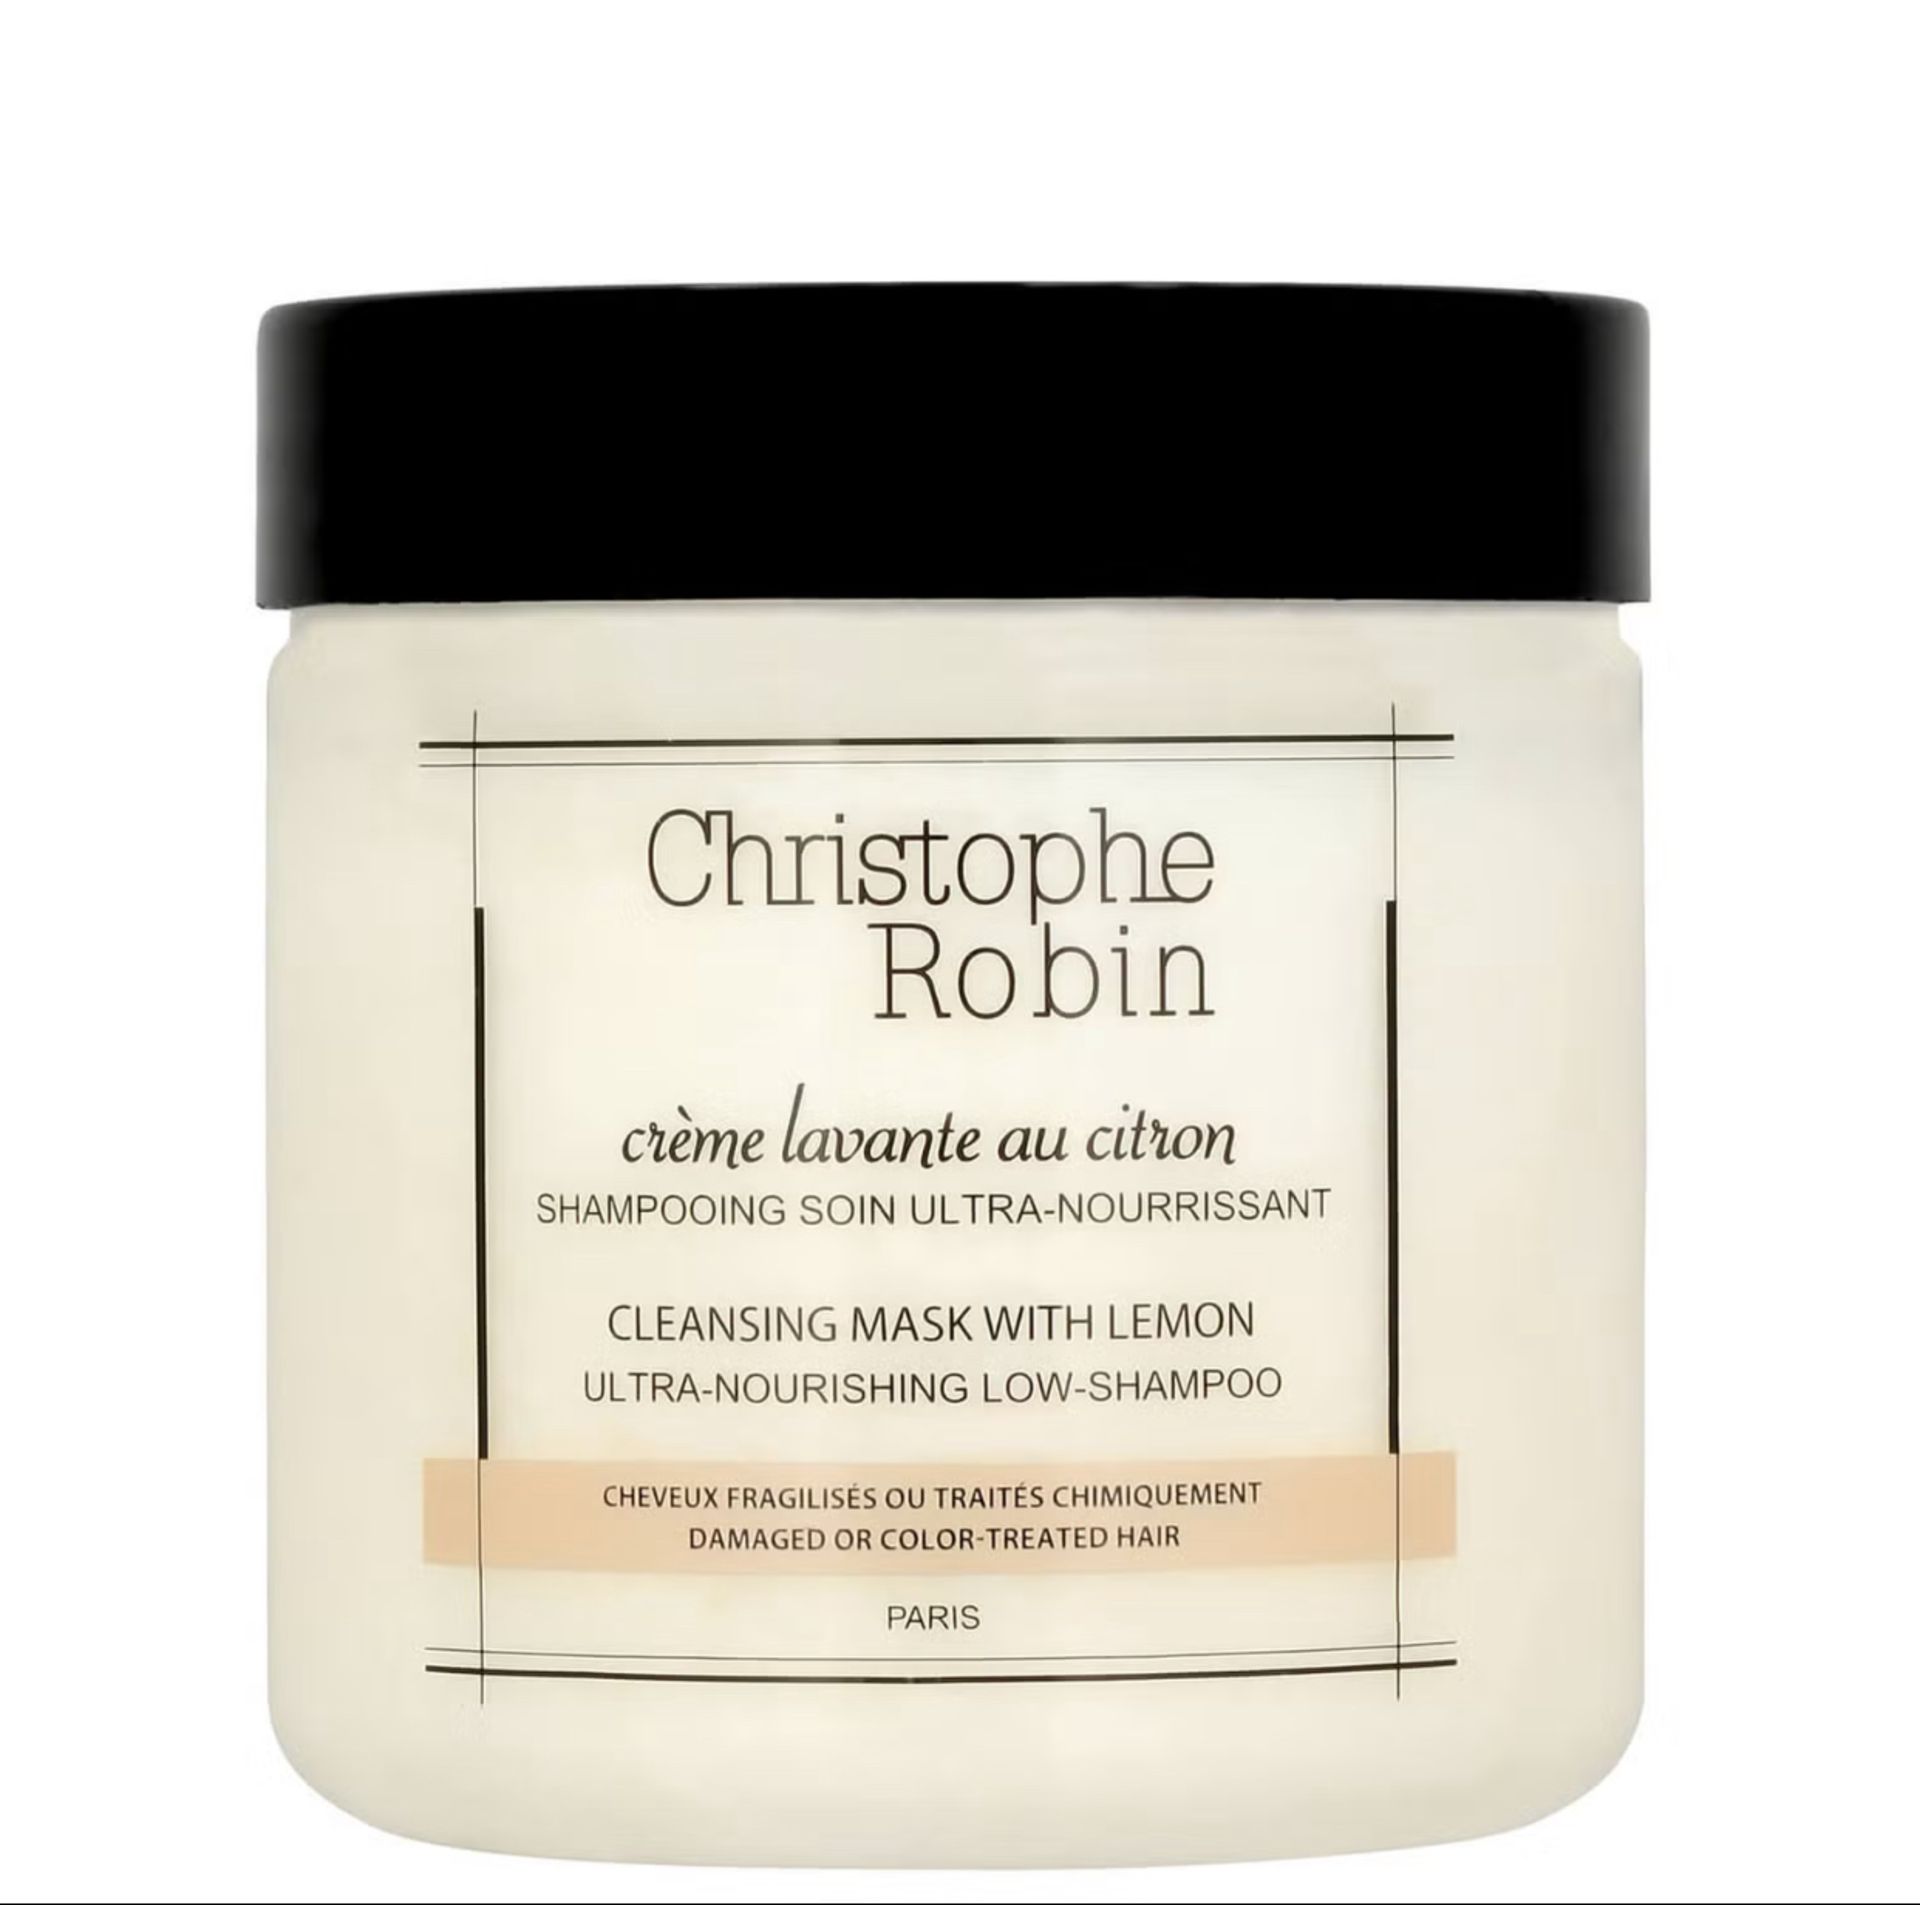 60 X CHRISTOPHE ROBIN CLEANSING MASK WITH LEMON 250ML RRP £2220